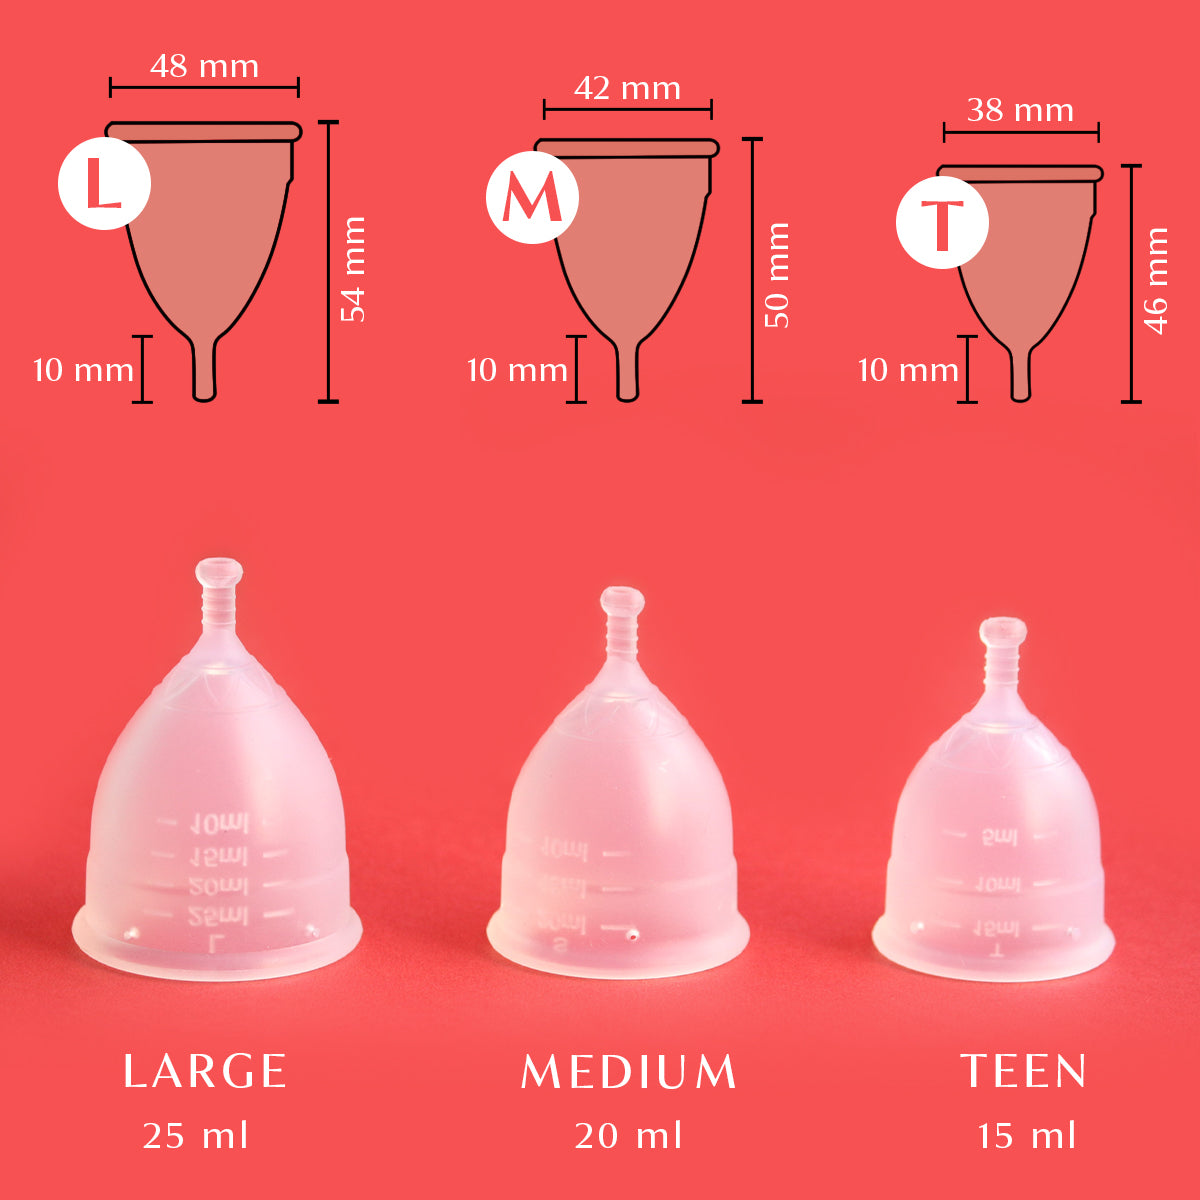 menstrual cups for woman banner image